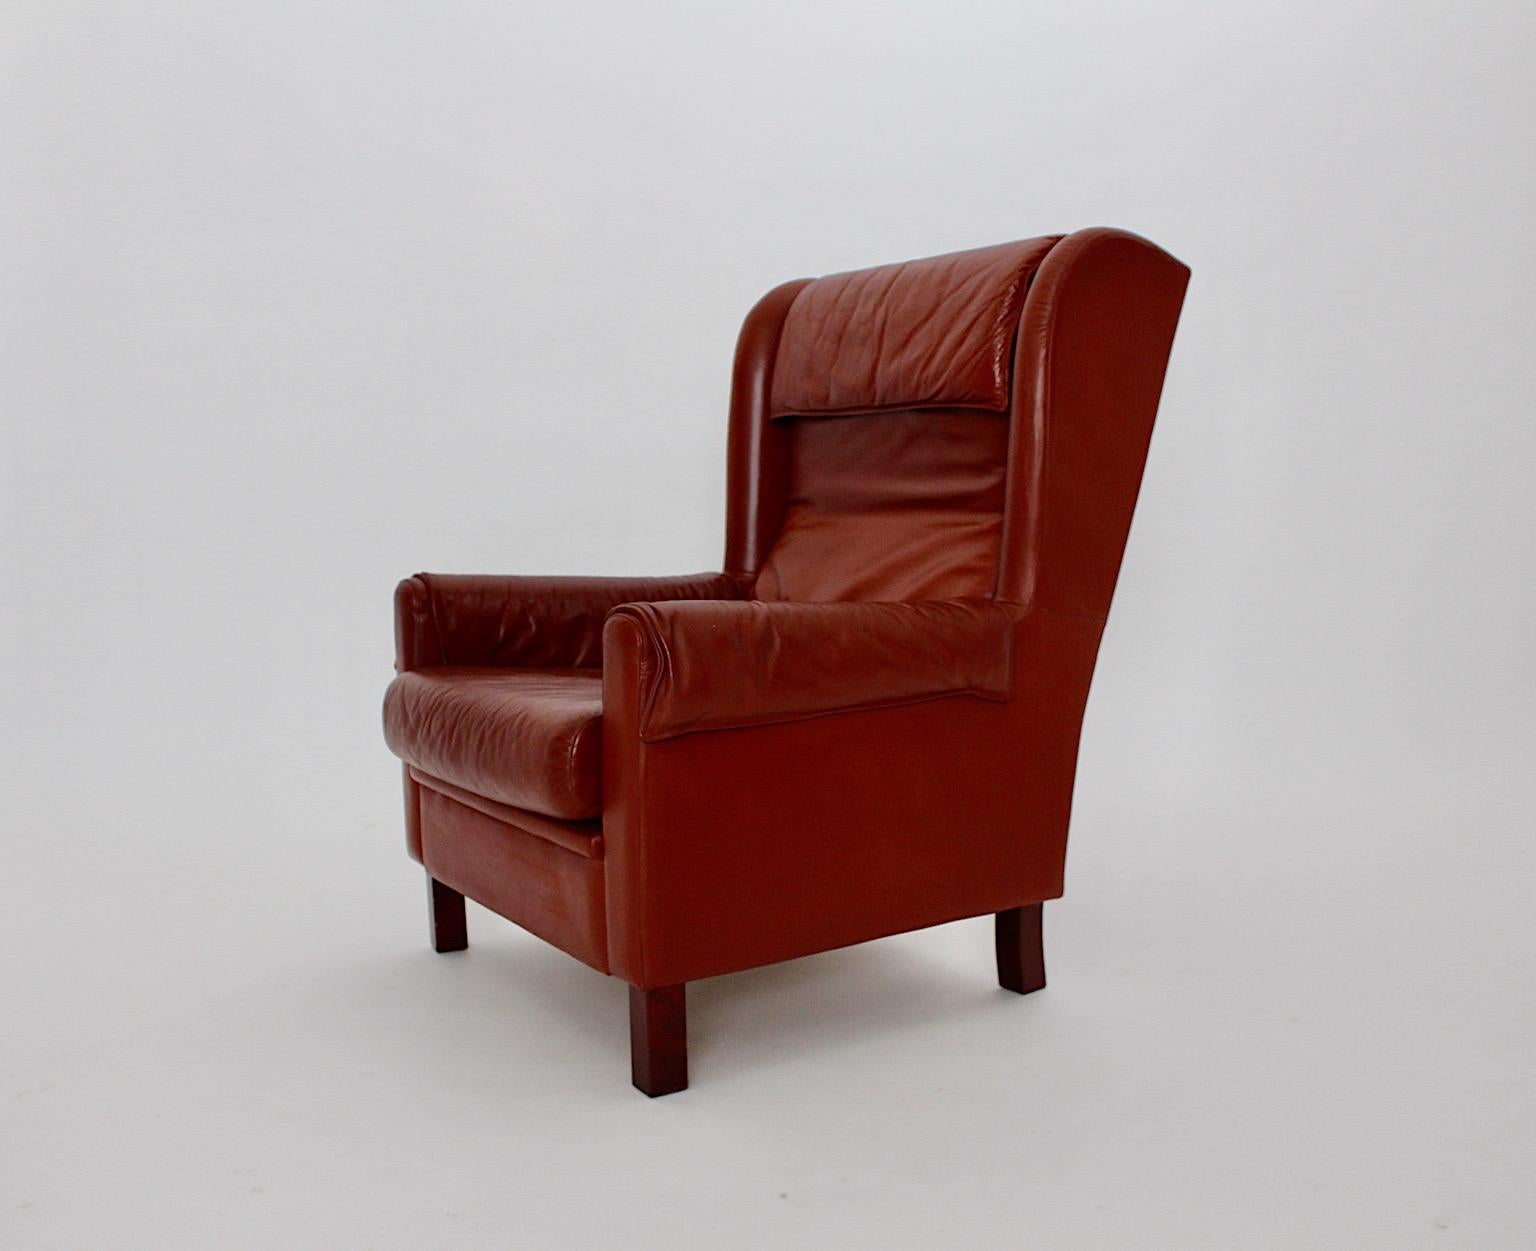 Leather vintage wingback chair or lounge chair from reddish brown leather 1970s Austria.
While the vintage wingback leather chair shows two loose cushions its feet are made from beech and walnut veneer.
The wingback chair or lounge chair is